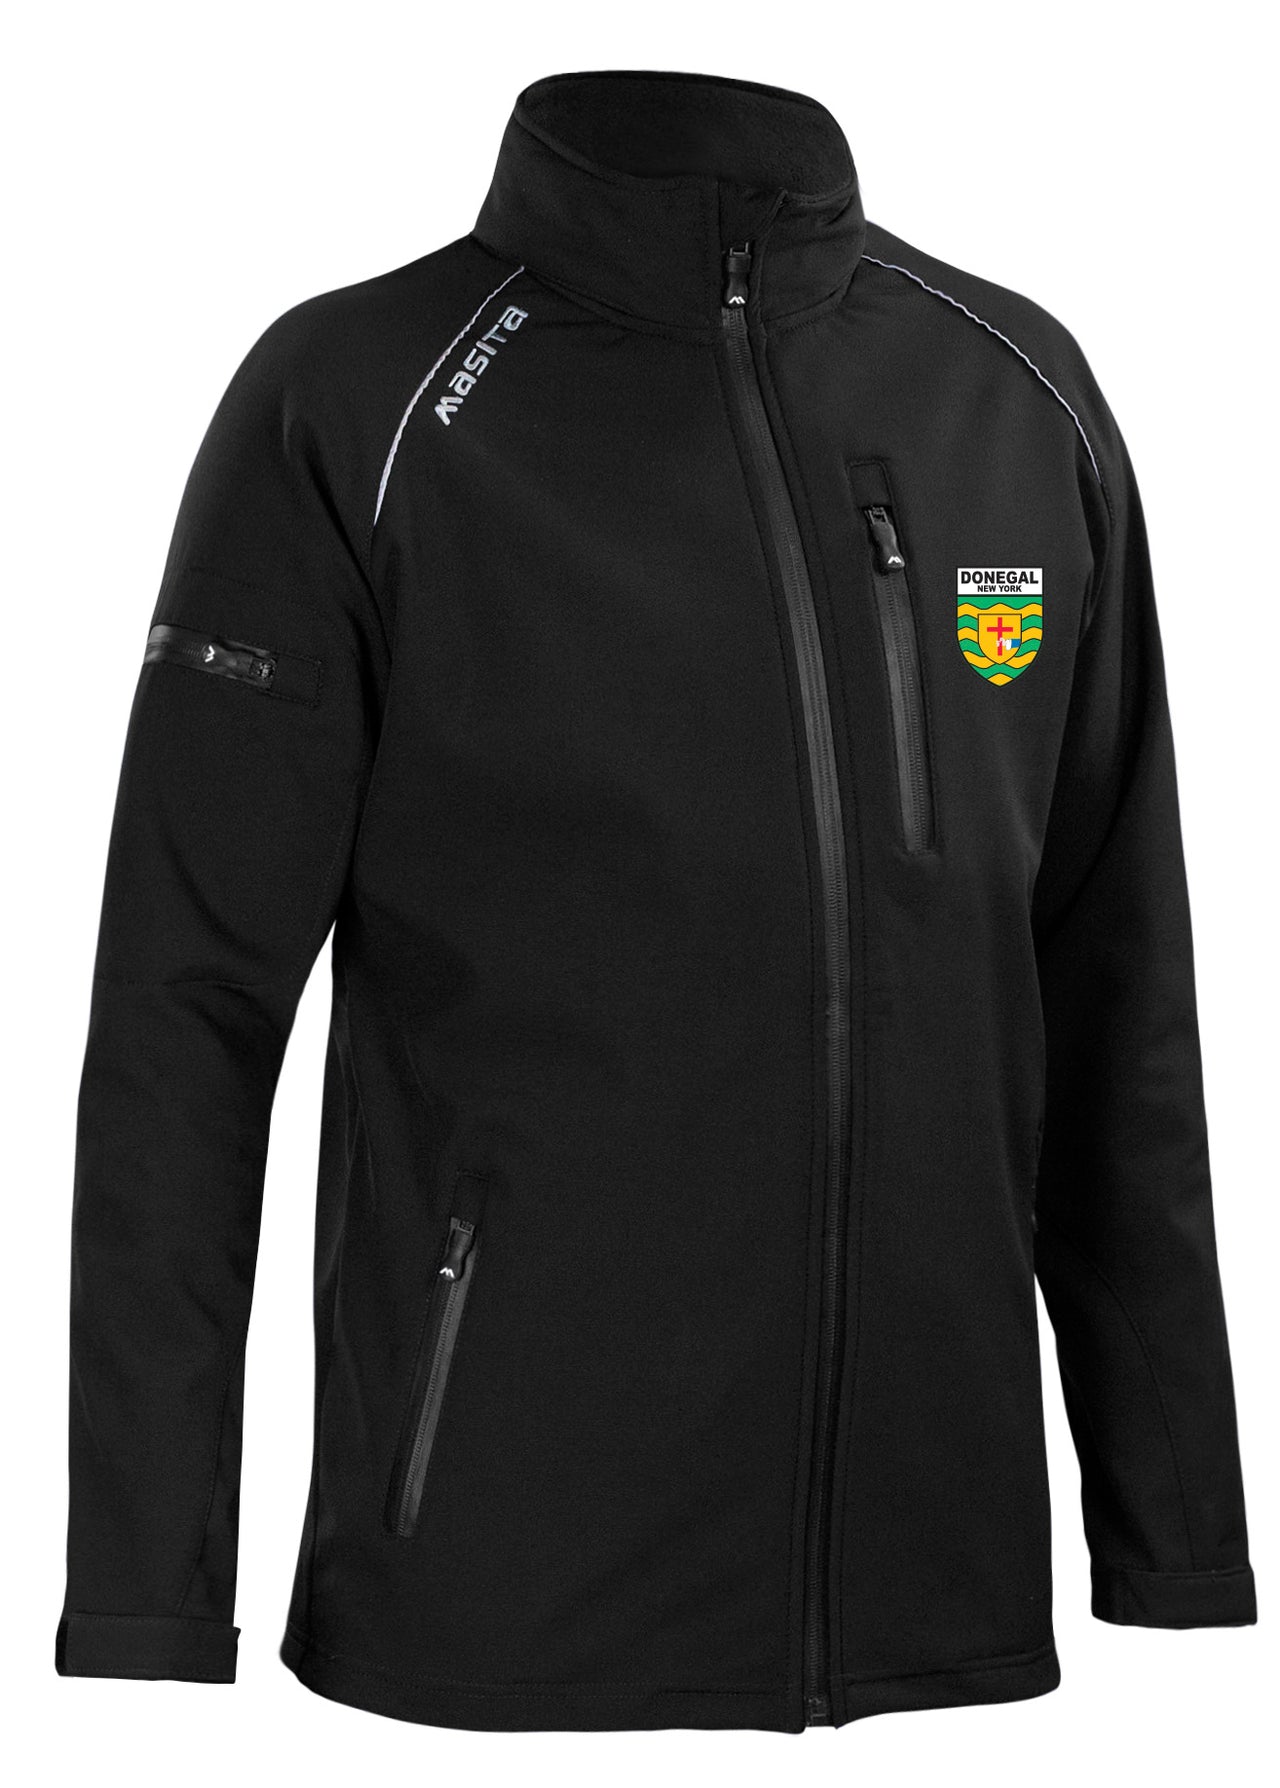 Donegal New York Softshell Jacket Adult